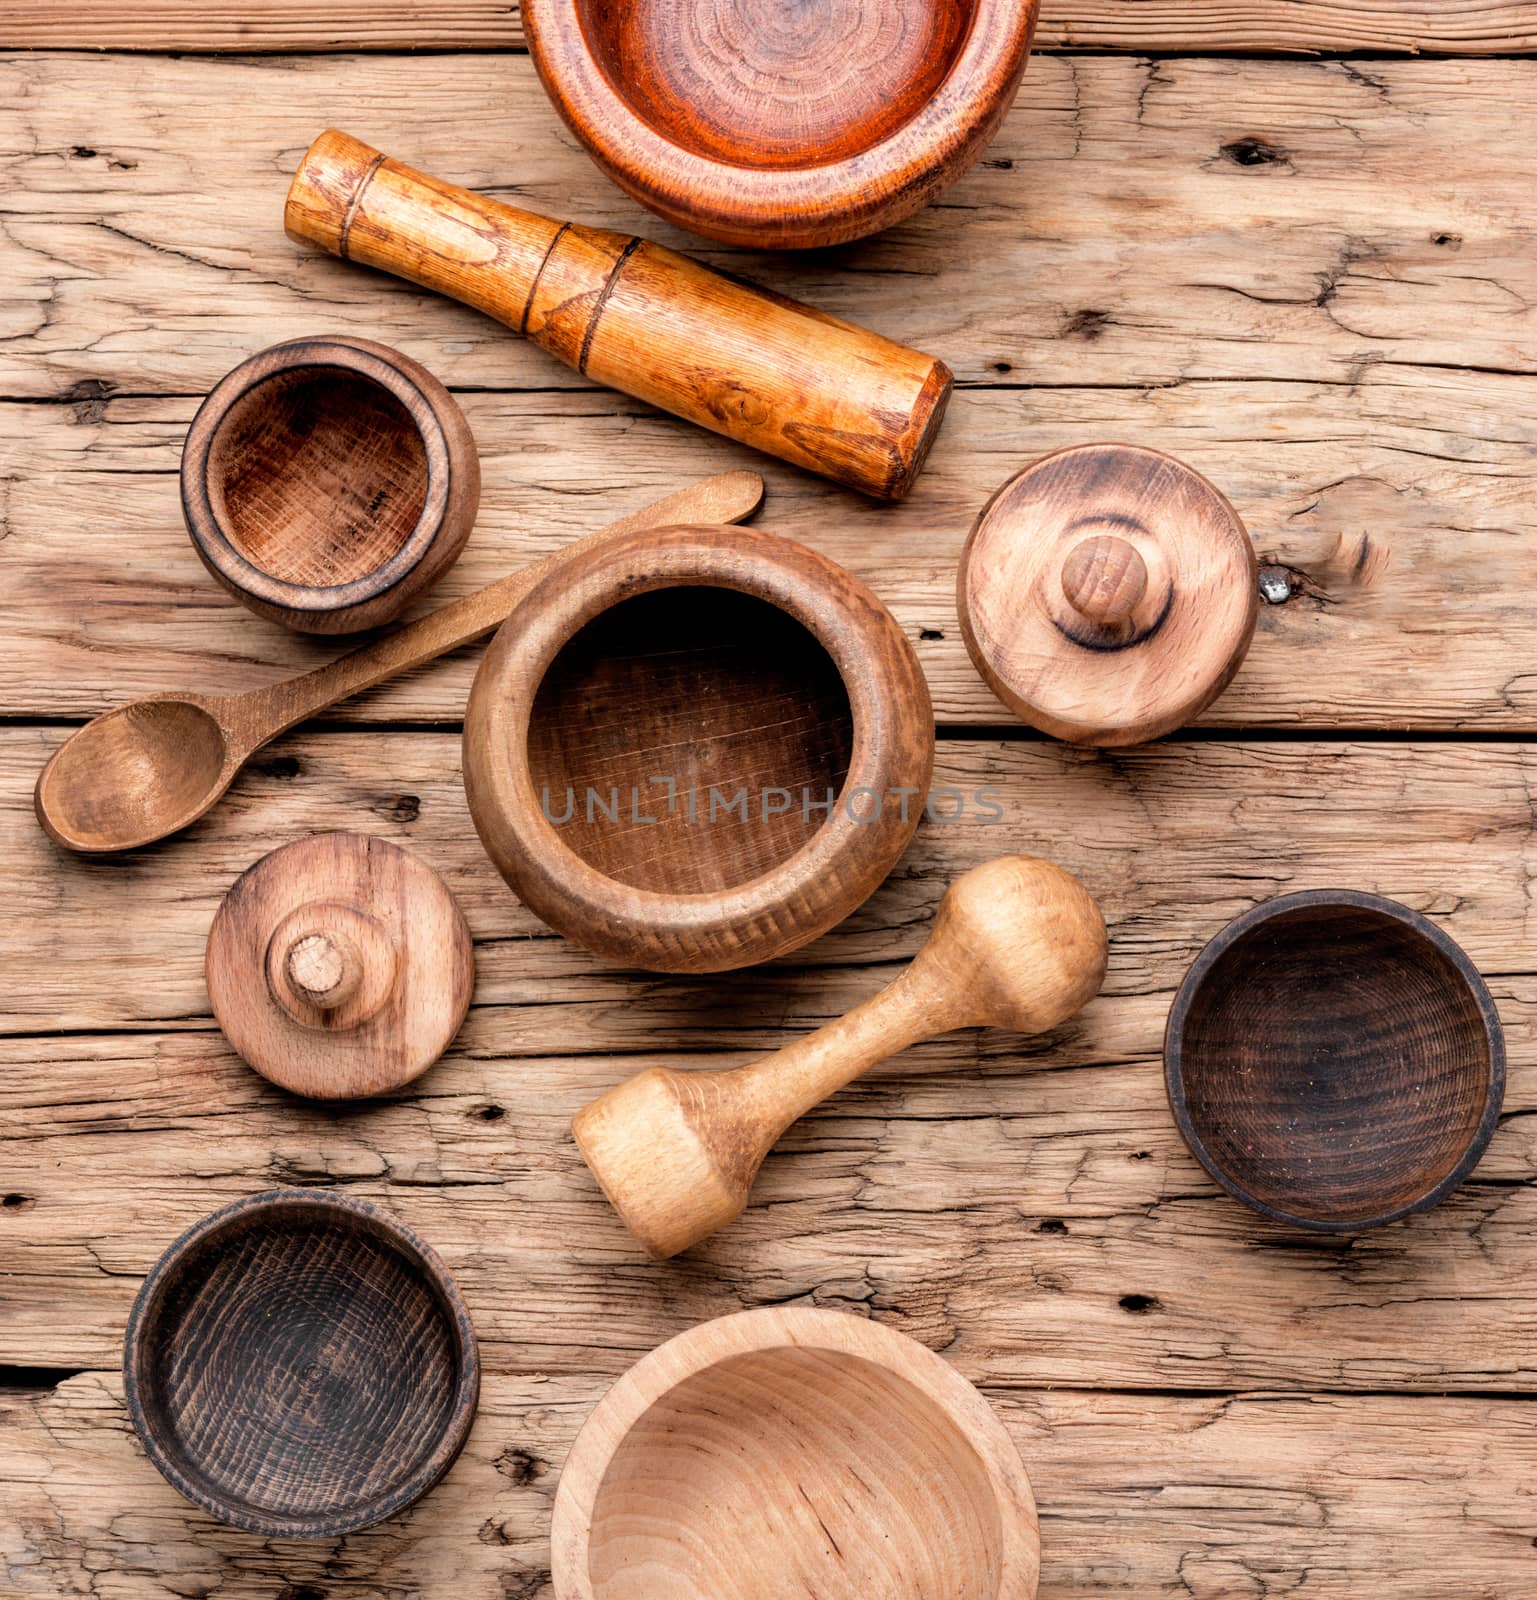 Empty wooden mortar and pestle on wooden old background.Cooking utensils.Mortar with pestle